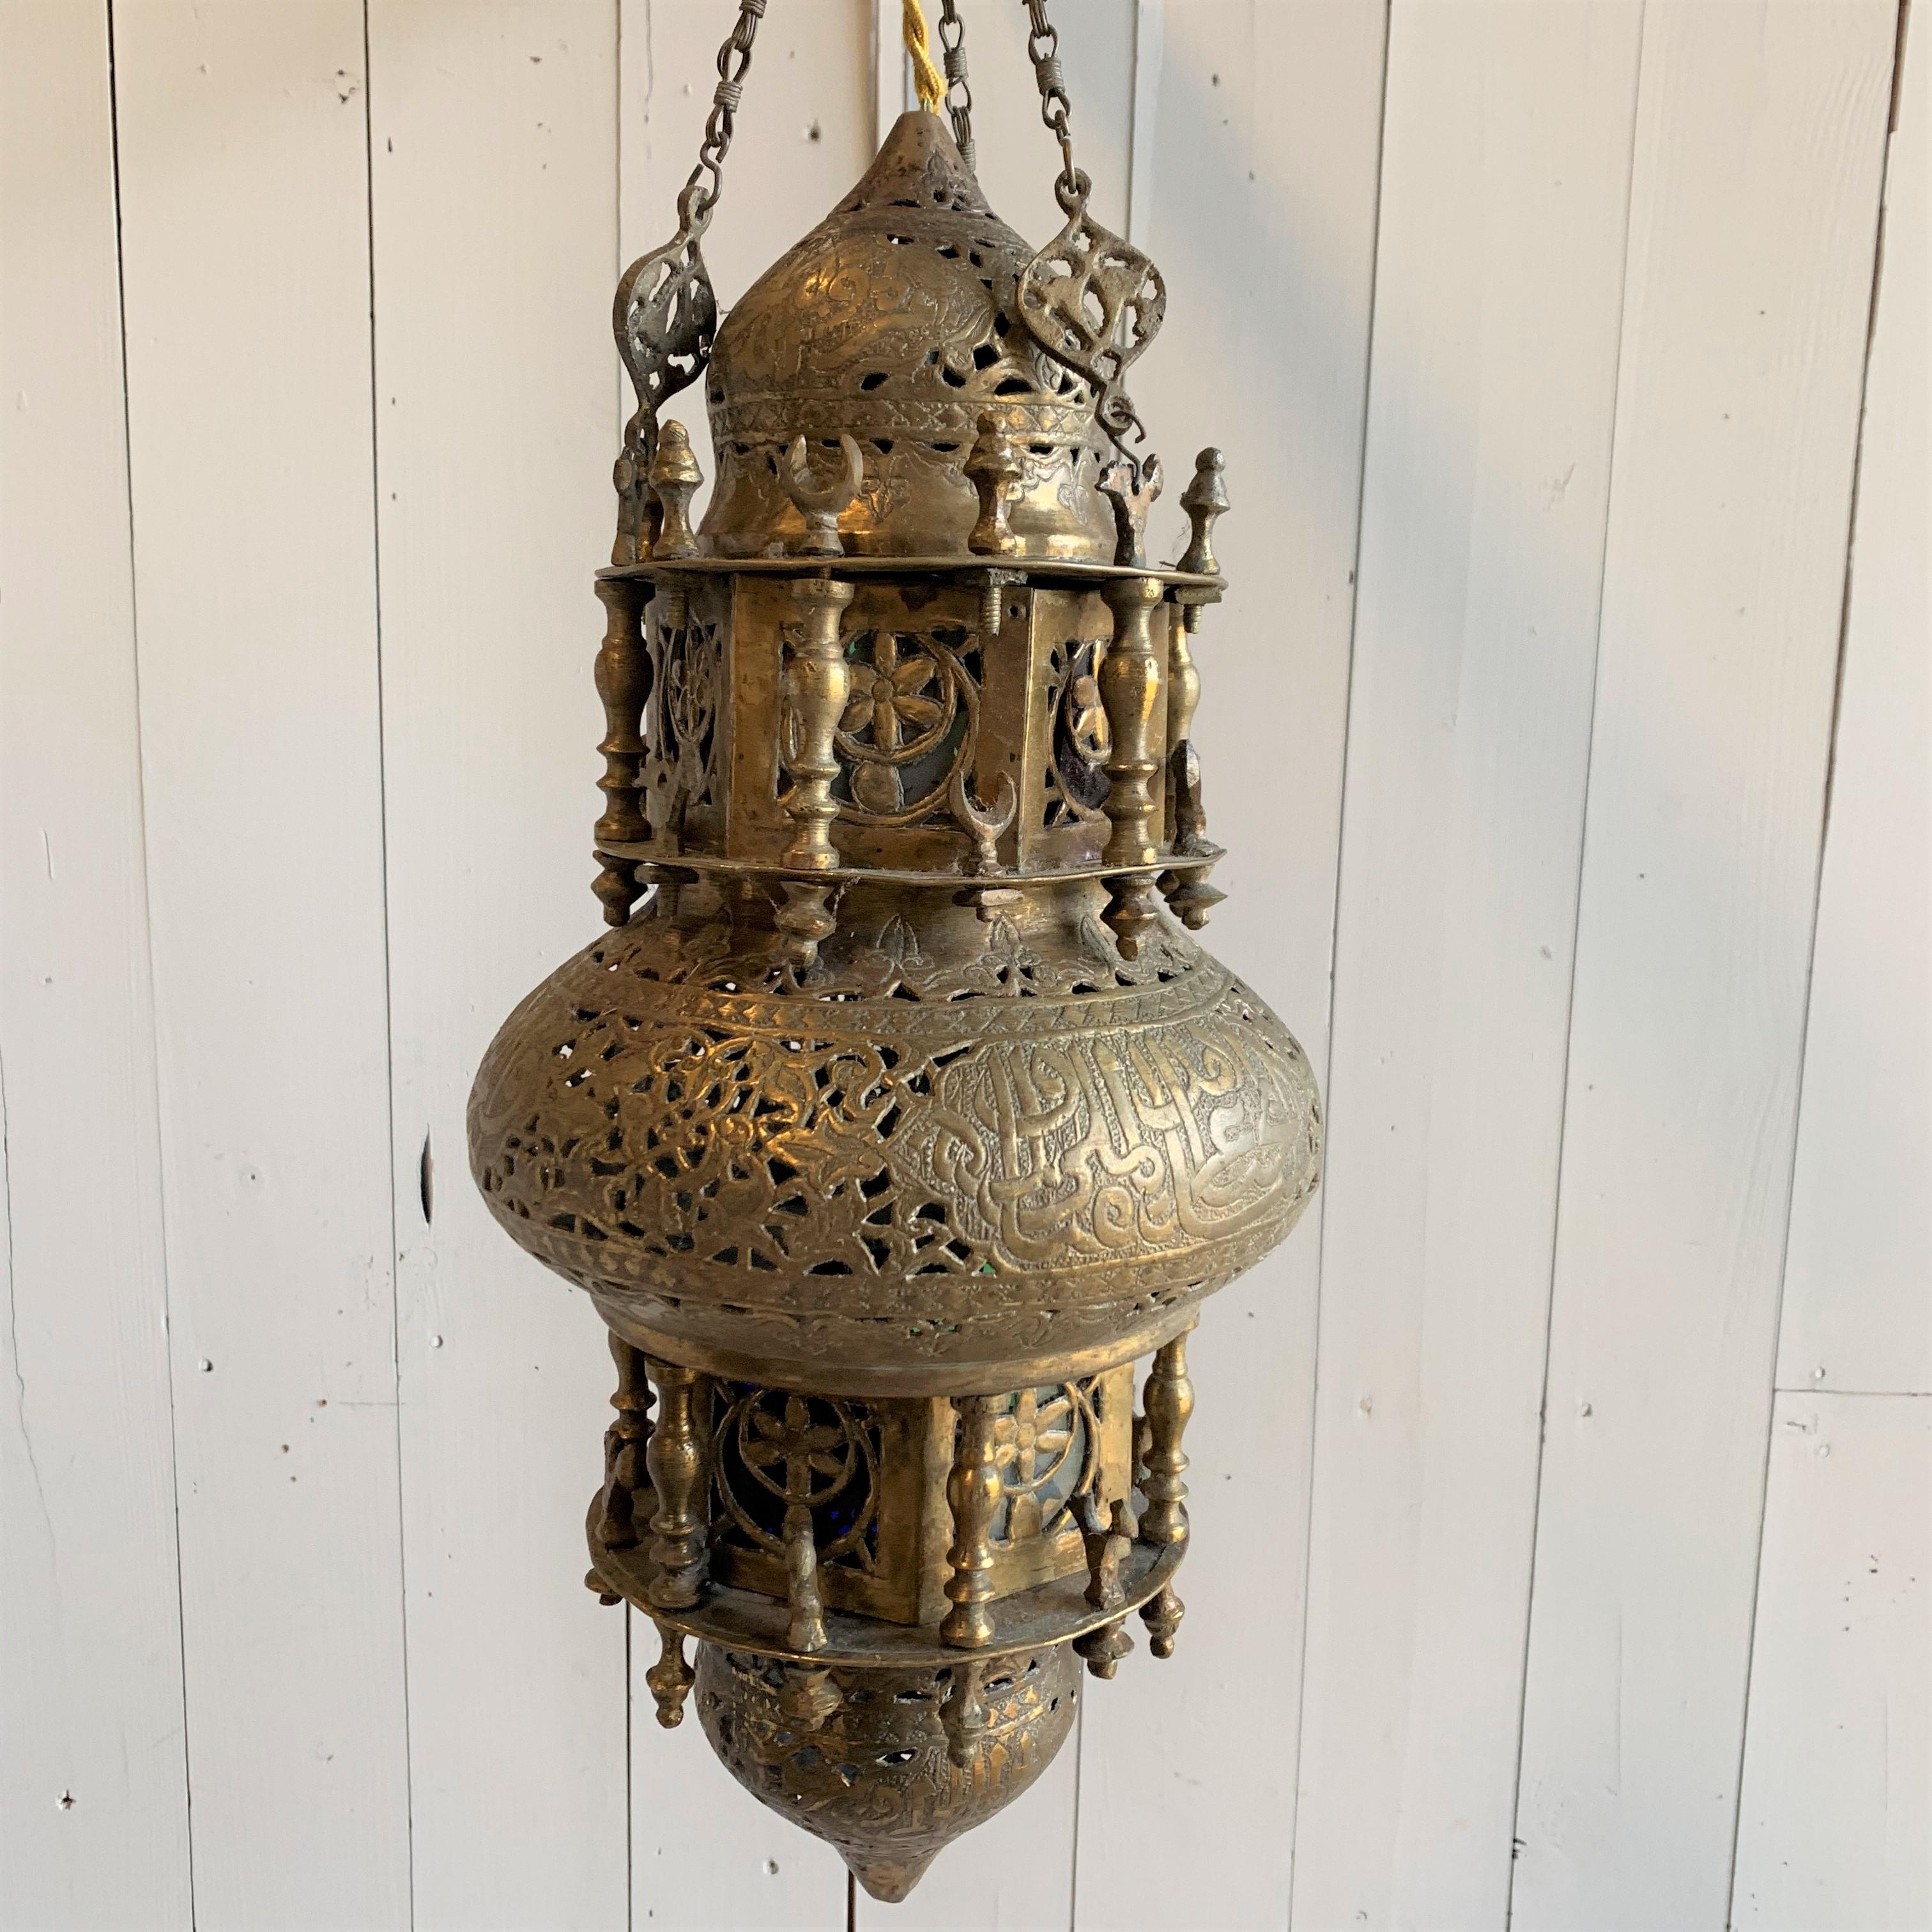 A Moroccan style hanging lantern in pierced and embossed brass with colored glass panes. Recently rewired.